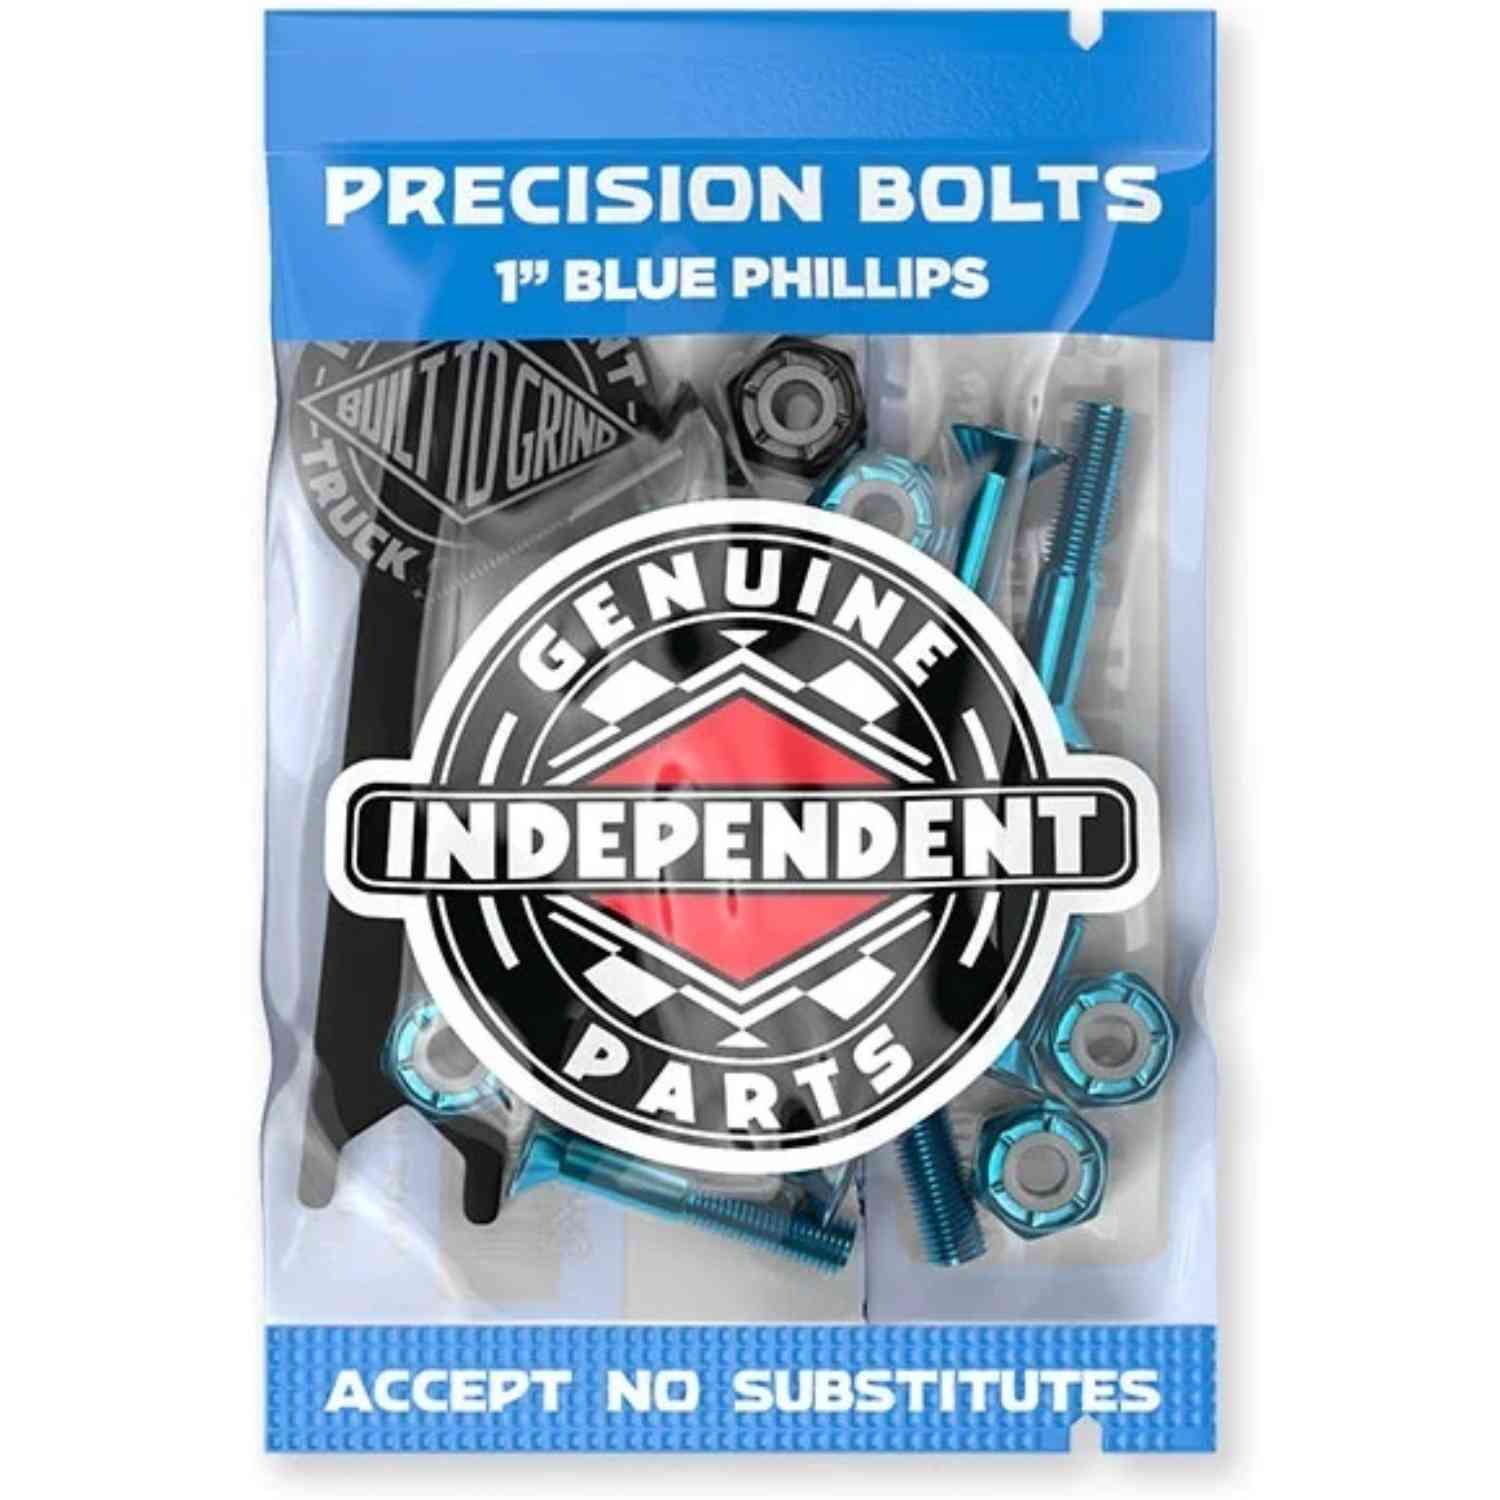 Independent Genuine Parts Phillips Hardware 1" Blue/Black with tool